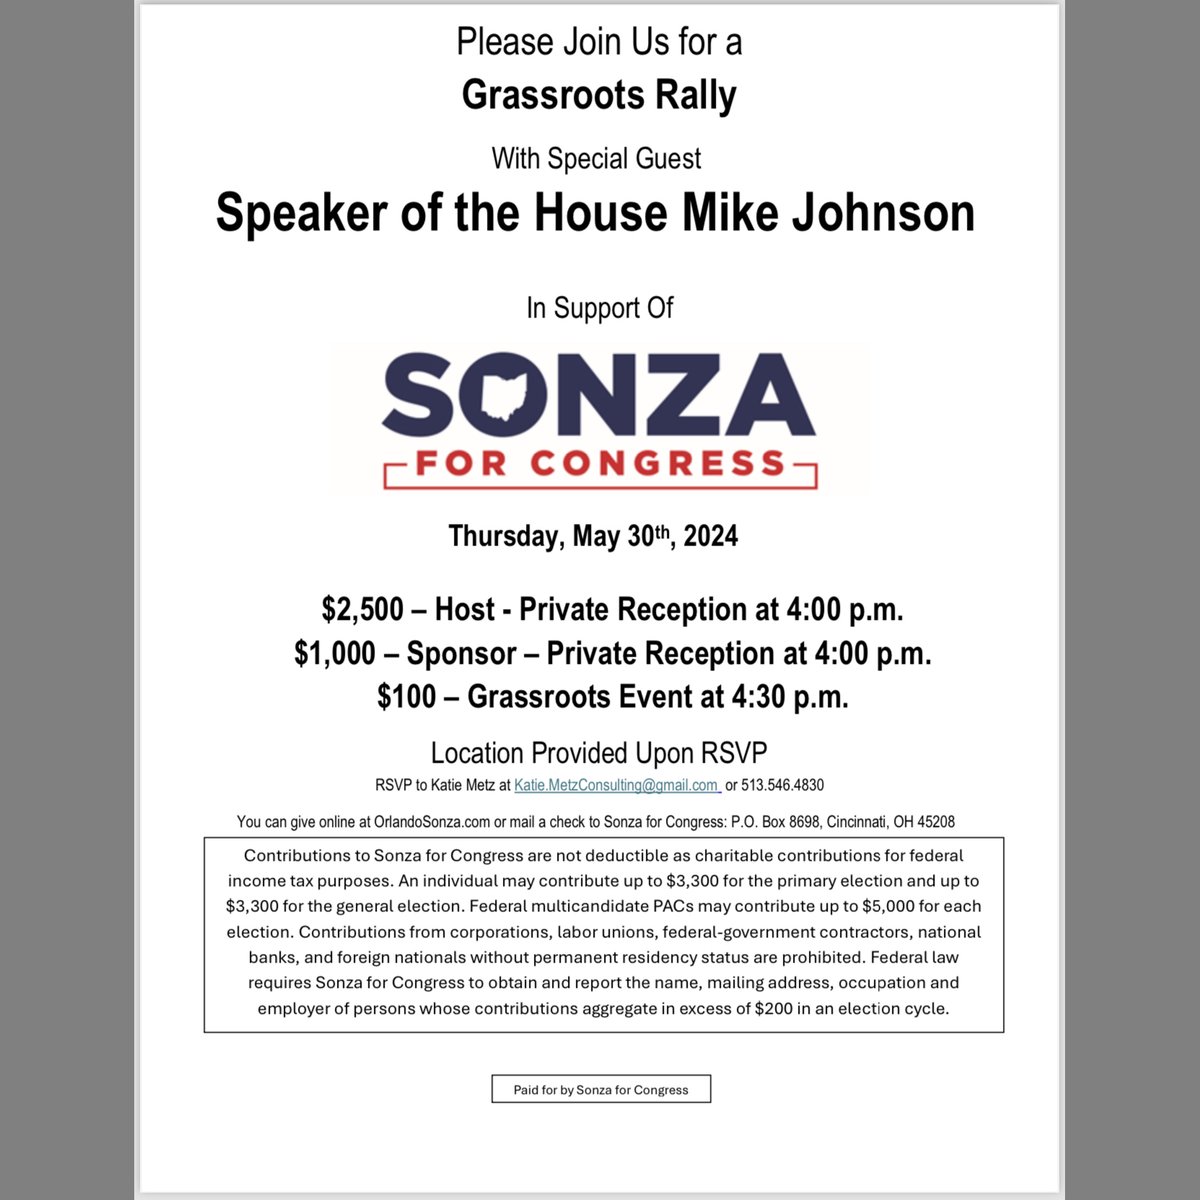 Two weeks from today, join @OrlandoSonza & Speaker of the US House, Mike Johnson, for a grassroots rally!

RSVP to Katie Metz at Katie.MetzConsulting@gmail.com or 513-546-4830.

#Republican
#Conservative
#OrlandoSonza
#OH1
#SpeakerJohnson
#SpeakerMikeJohnson
#WarrenCountyOhio